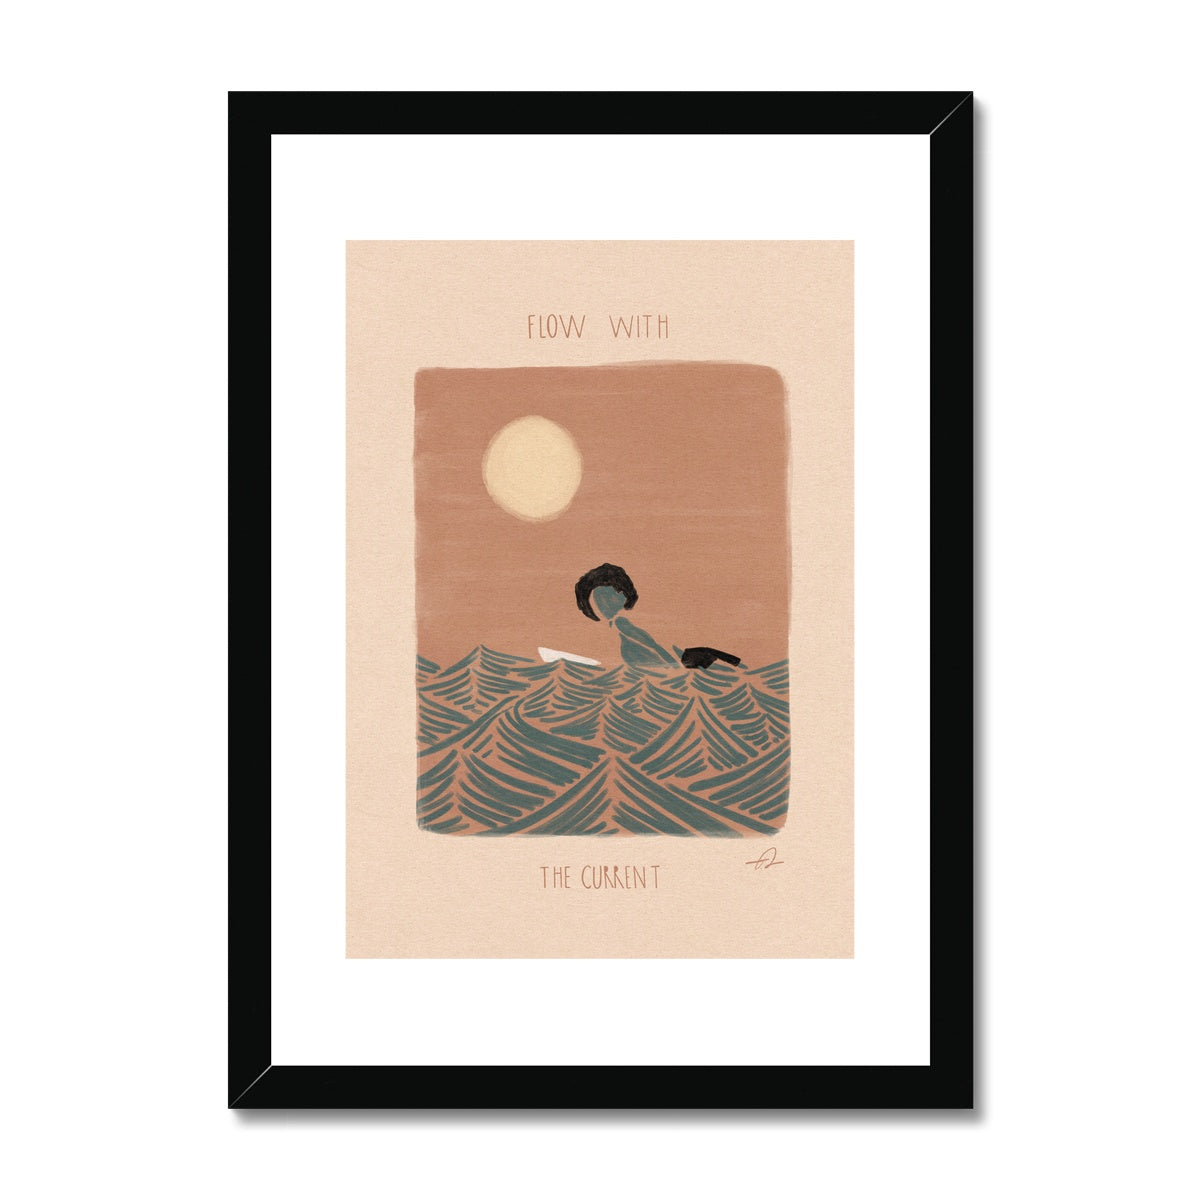 Flow with the current Framed & Mounted Print